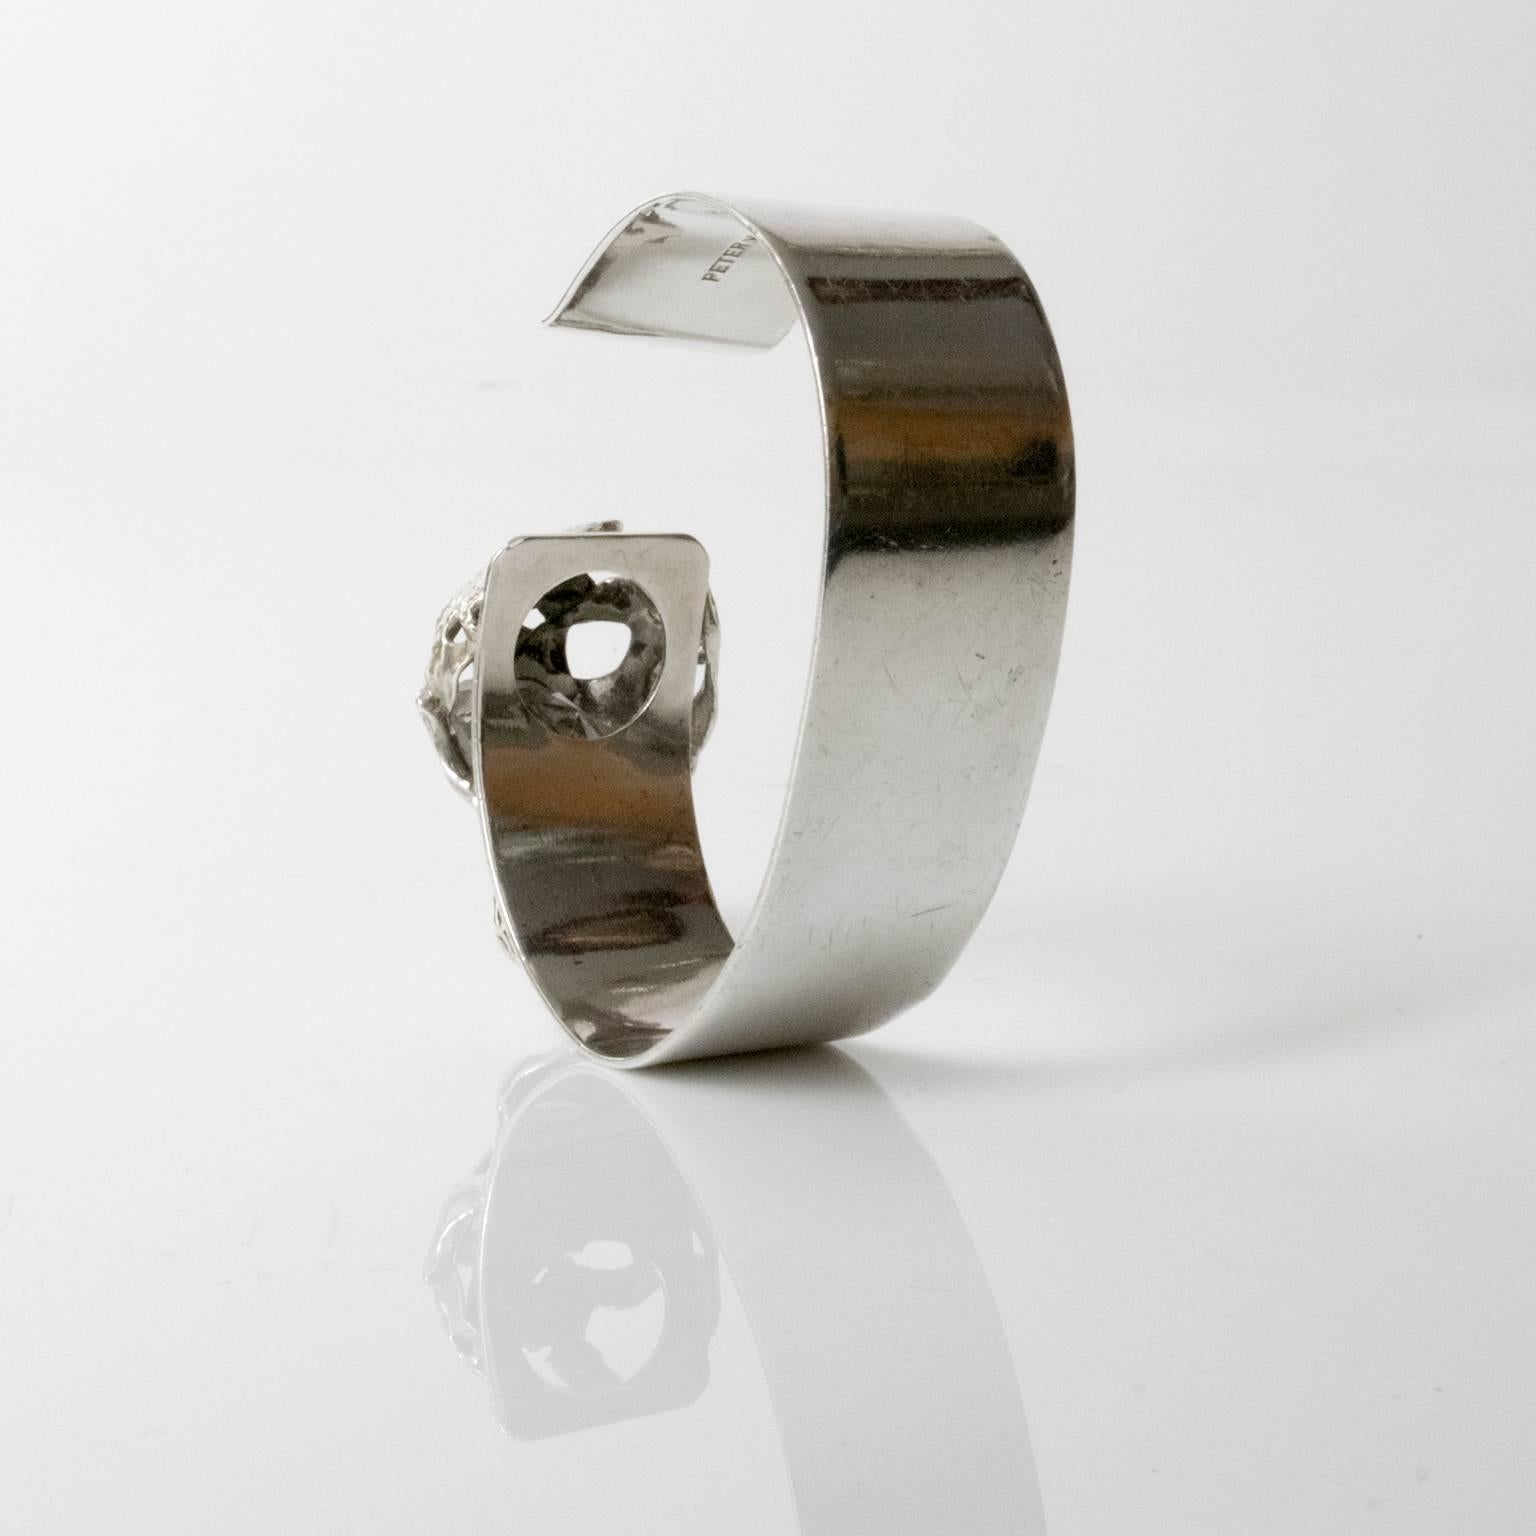 Scandinavian Modern Bracelet Caged Crystal Peter Von Post, 1971 Stockholm In Excellent Condition For Sale In New York, NY